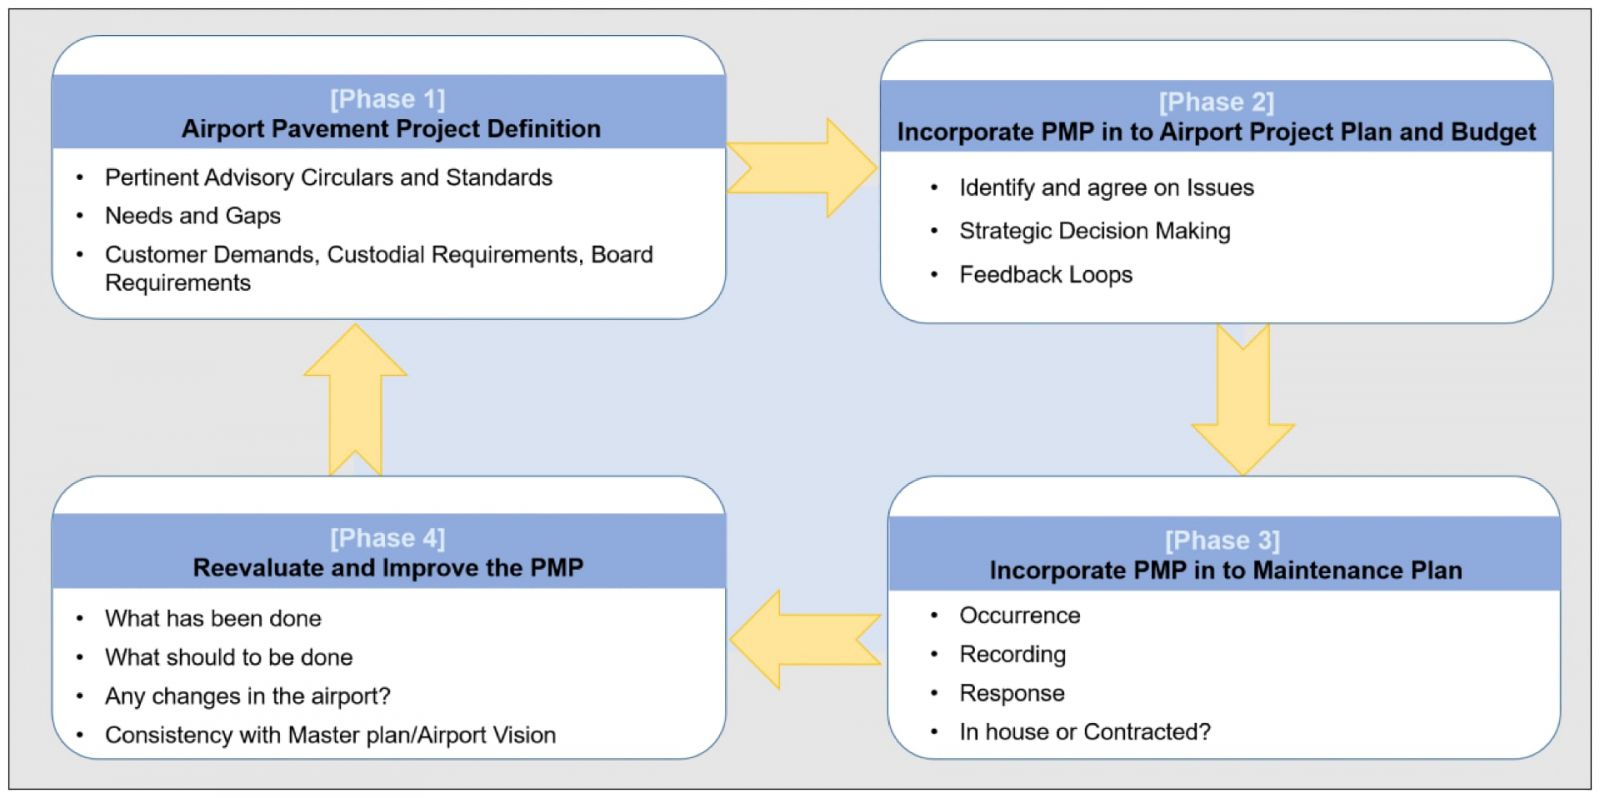 Flow Model of Proposed Design for Pavement Management Plan Decision Process (Figure 3 from the team’s proposal)